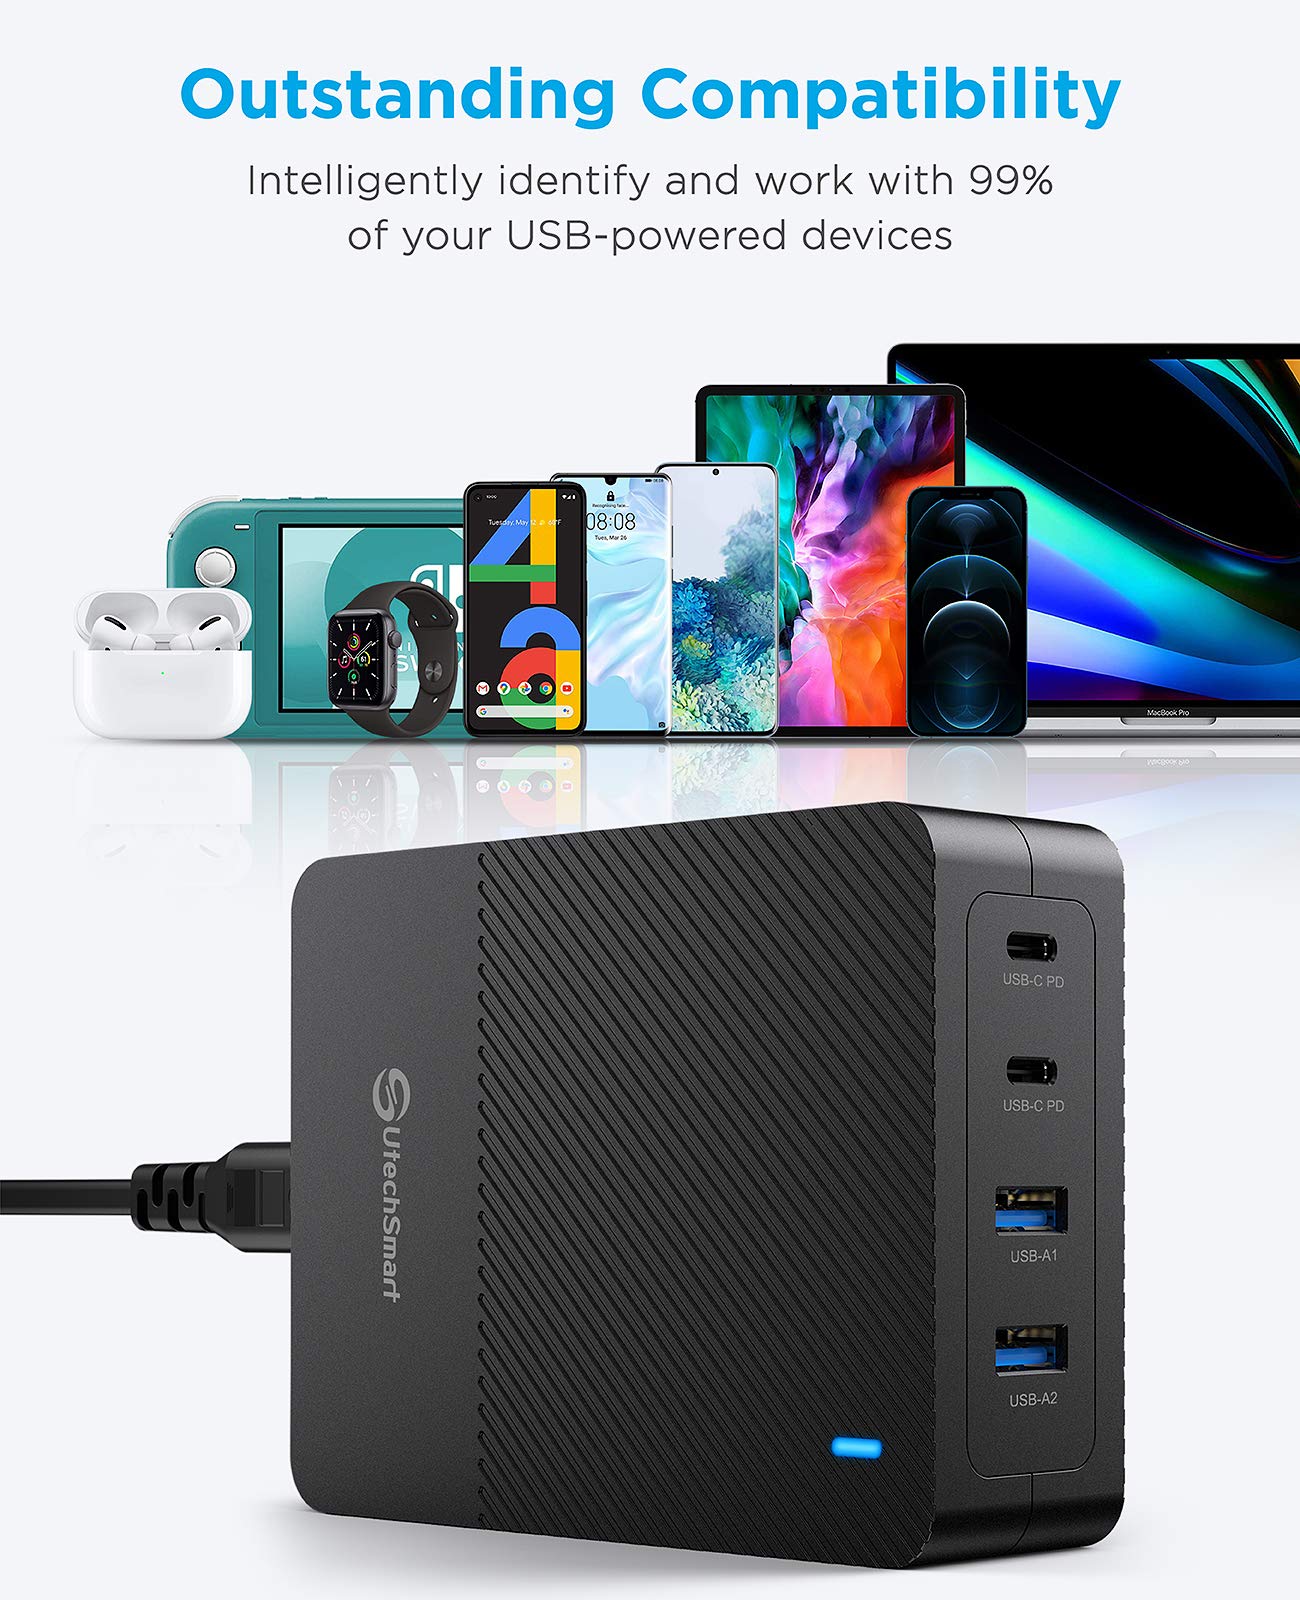 100W USB C Charger, UtechSmart 4-Port Fast Charger Station, Wall Charger Block Power Adapter Compatible with MacBook Pro/Air, iPad, iPhone 14 Pro, Galaxy, Steam Deck, Dell XPS, Google Pixelbook